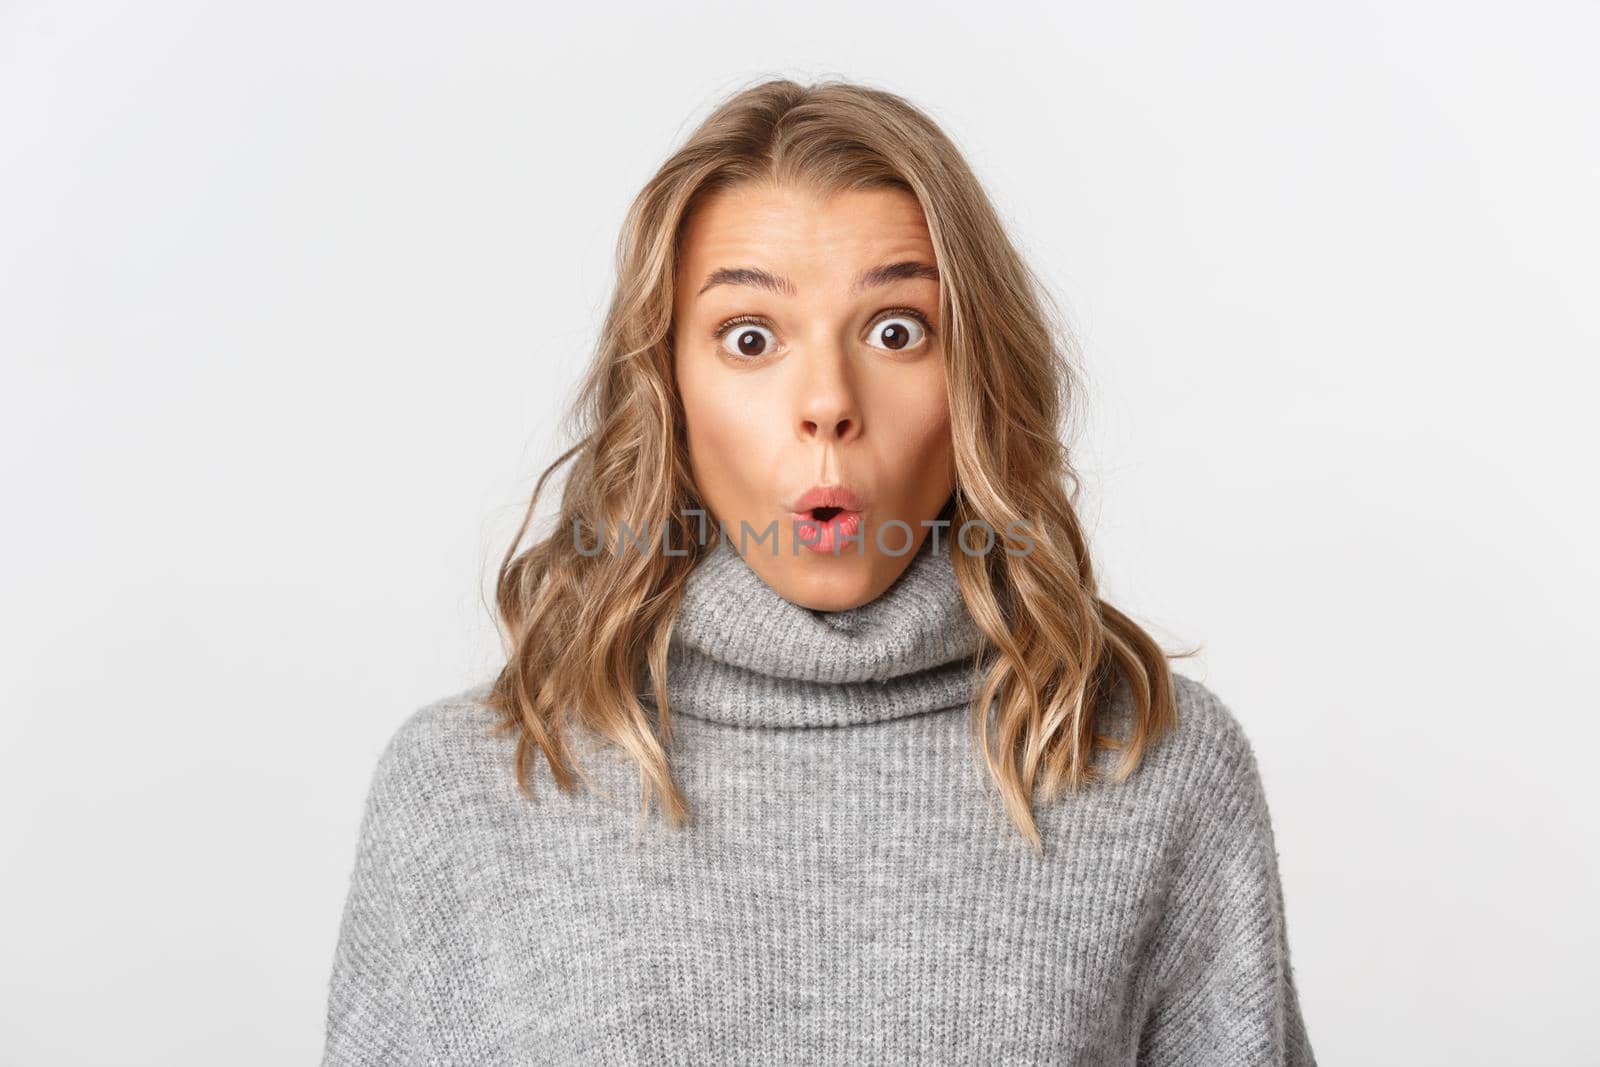 Close-up of attractive blond girl looking surprised, gasping amazed at camera, standing over white background.